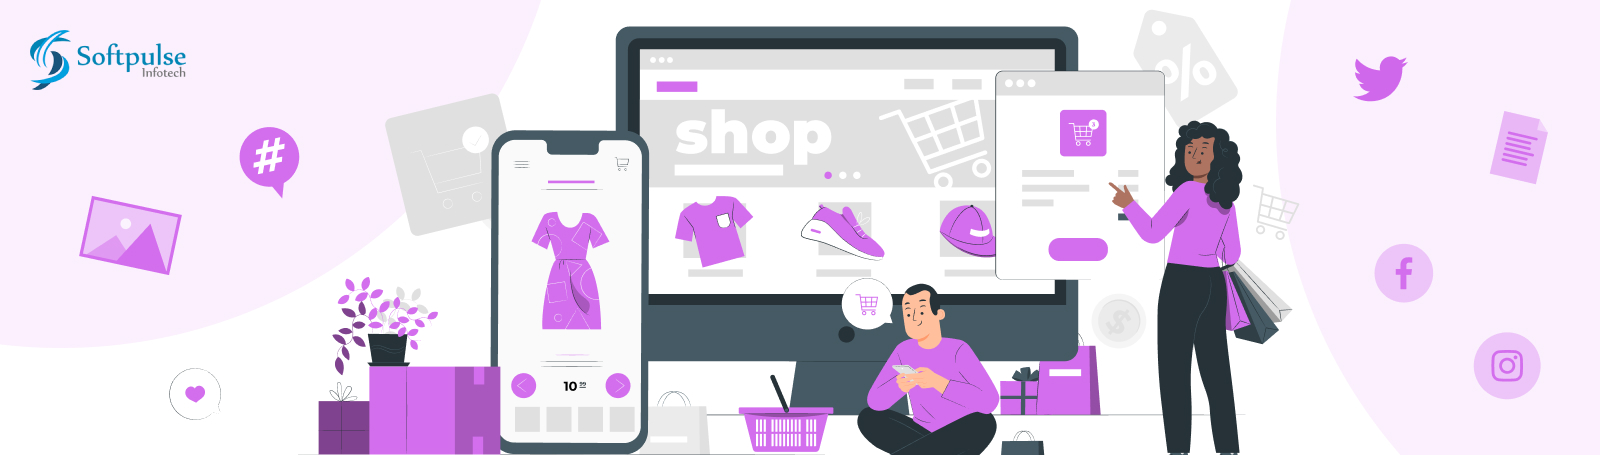 Top Tips for eCommerce Website Design That Help You Sales More